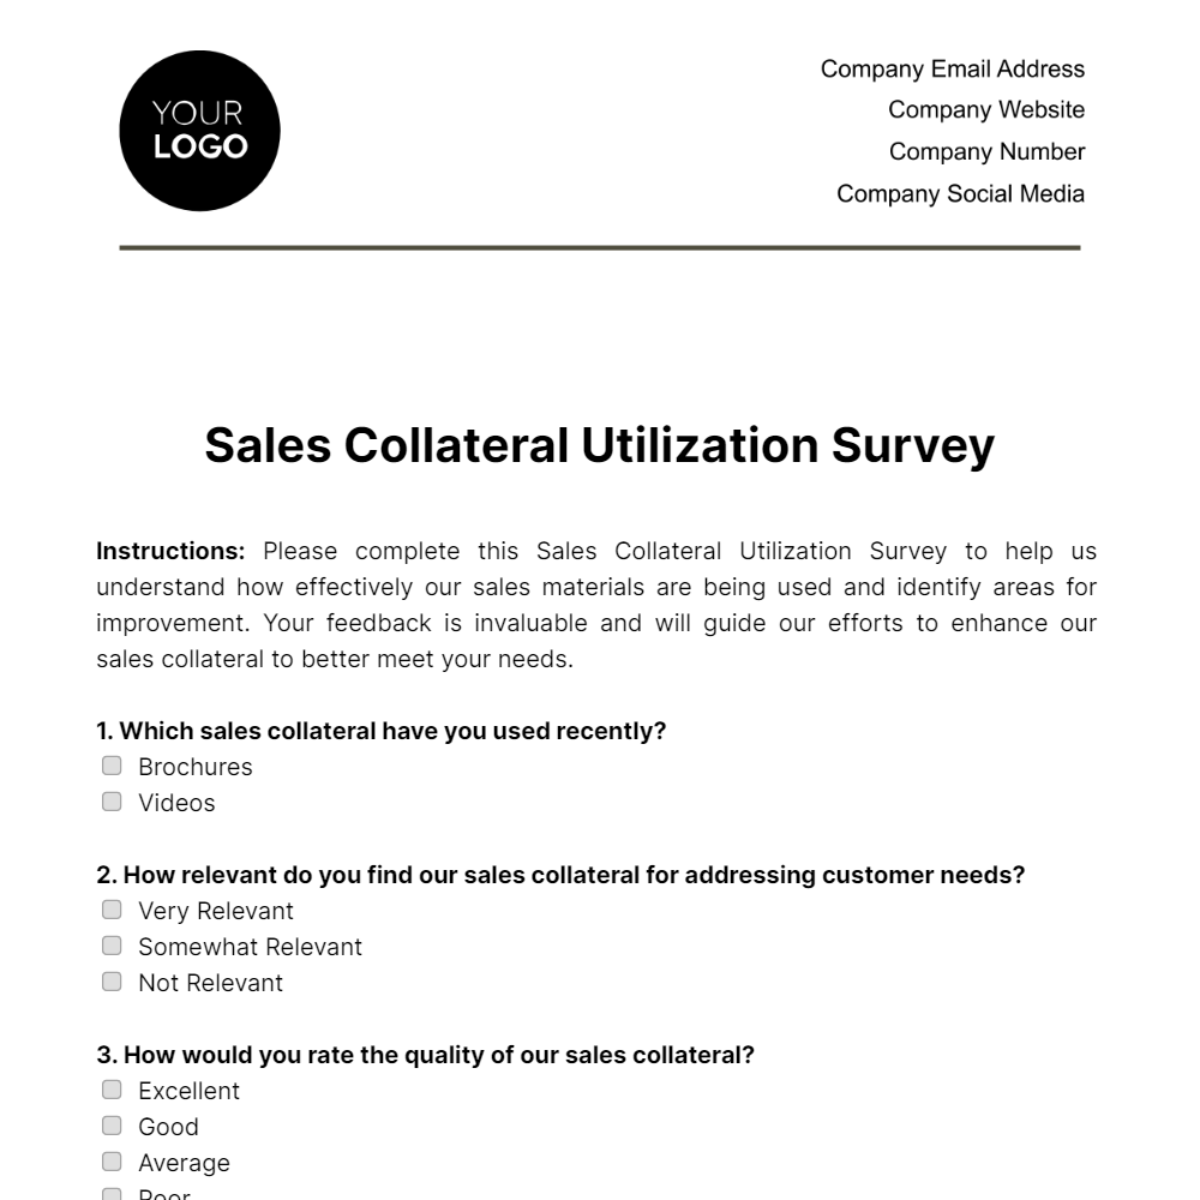 Sales Collateral Utilization Survey Template